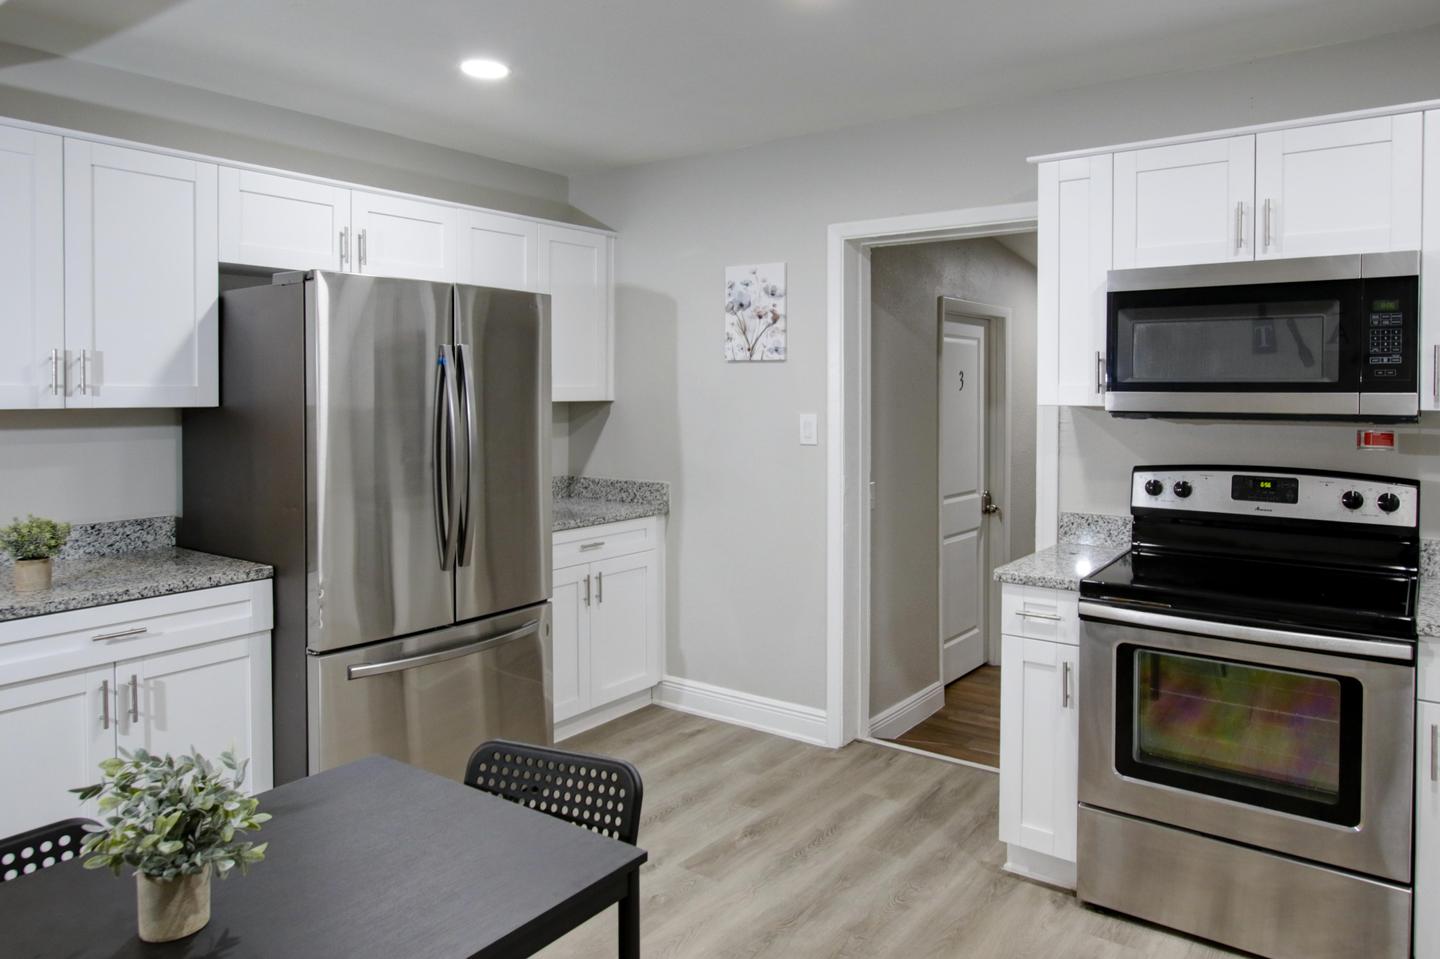 Updated eat-in kitchen with stainless steel refrigerator, oven, microwave and plenty of cabinet space for kitchen storage.